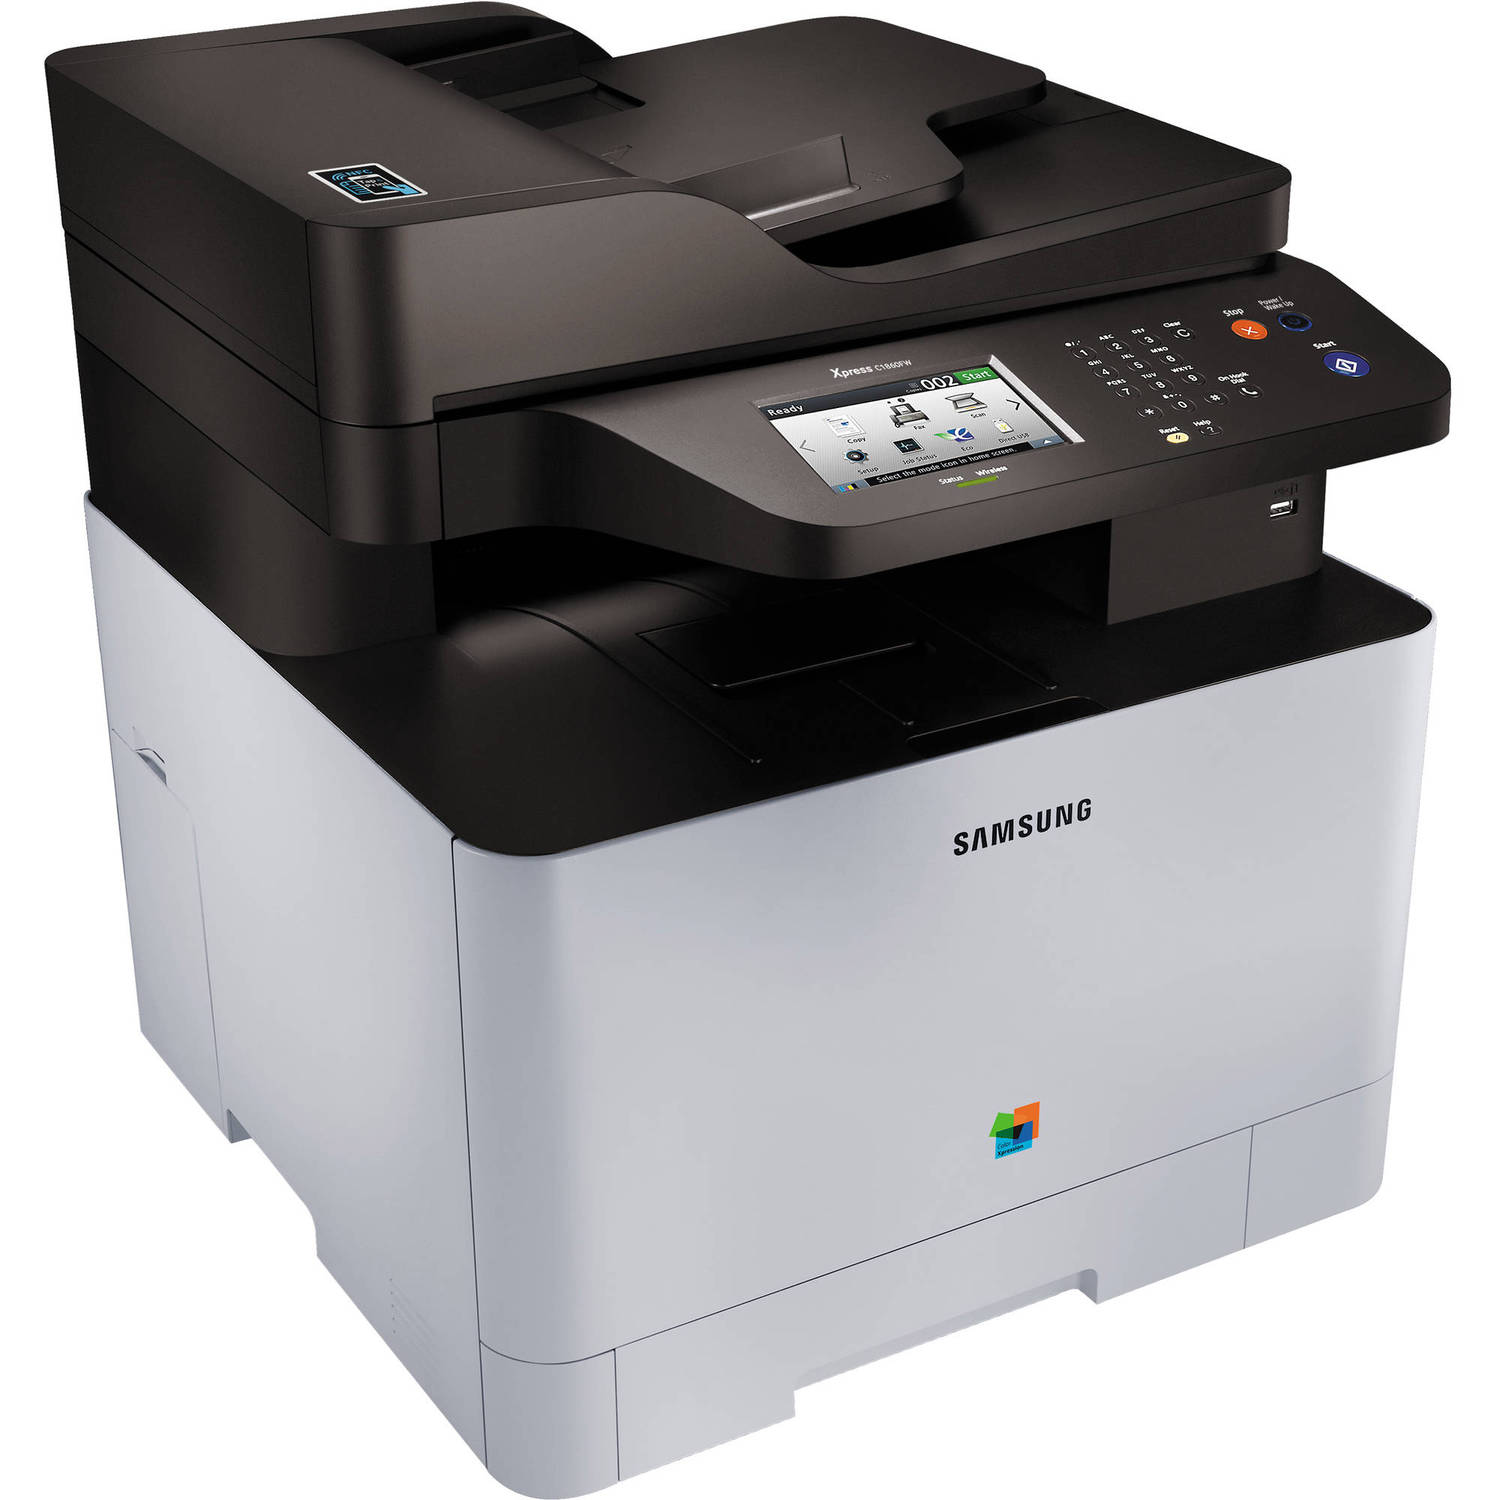 Samsung SLC1860FW/XBH Color All-in-one Laser Printer - Samsung Parts USA